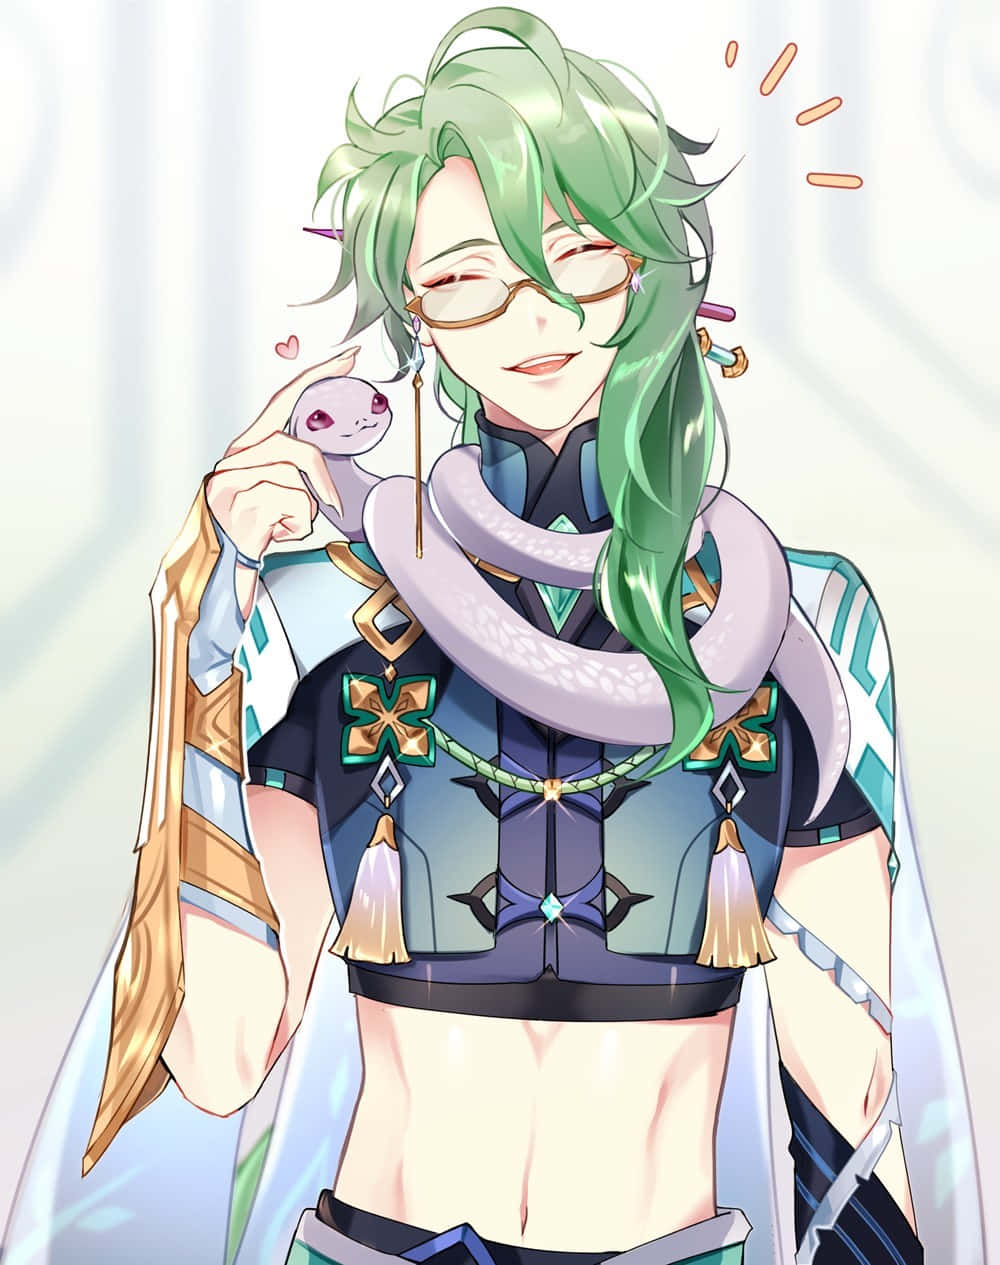 Smiling Green Haired Anime Characterwith Glassesand Snake Wallpaper